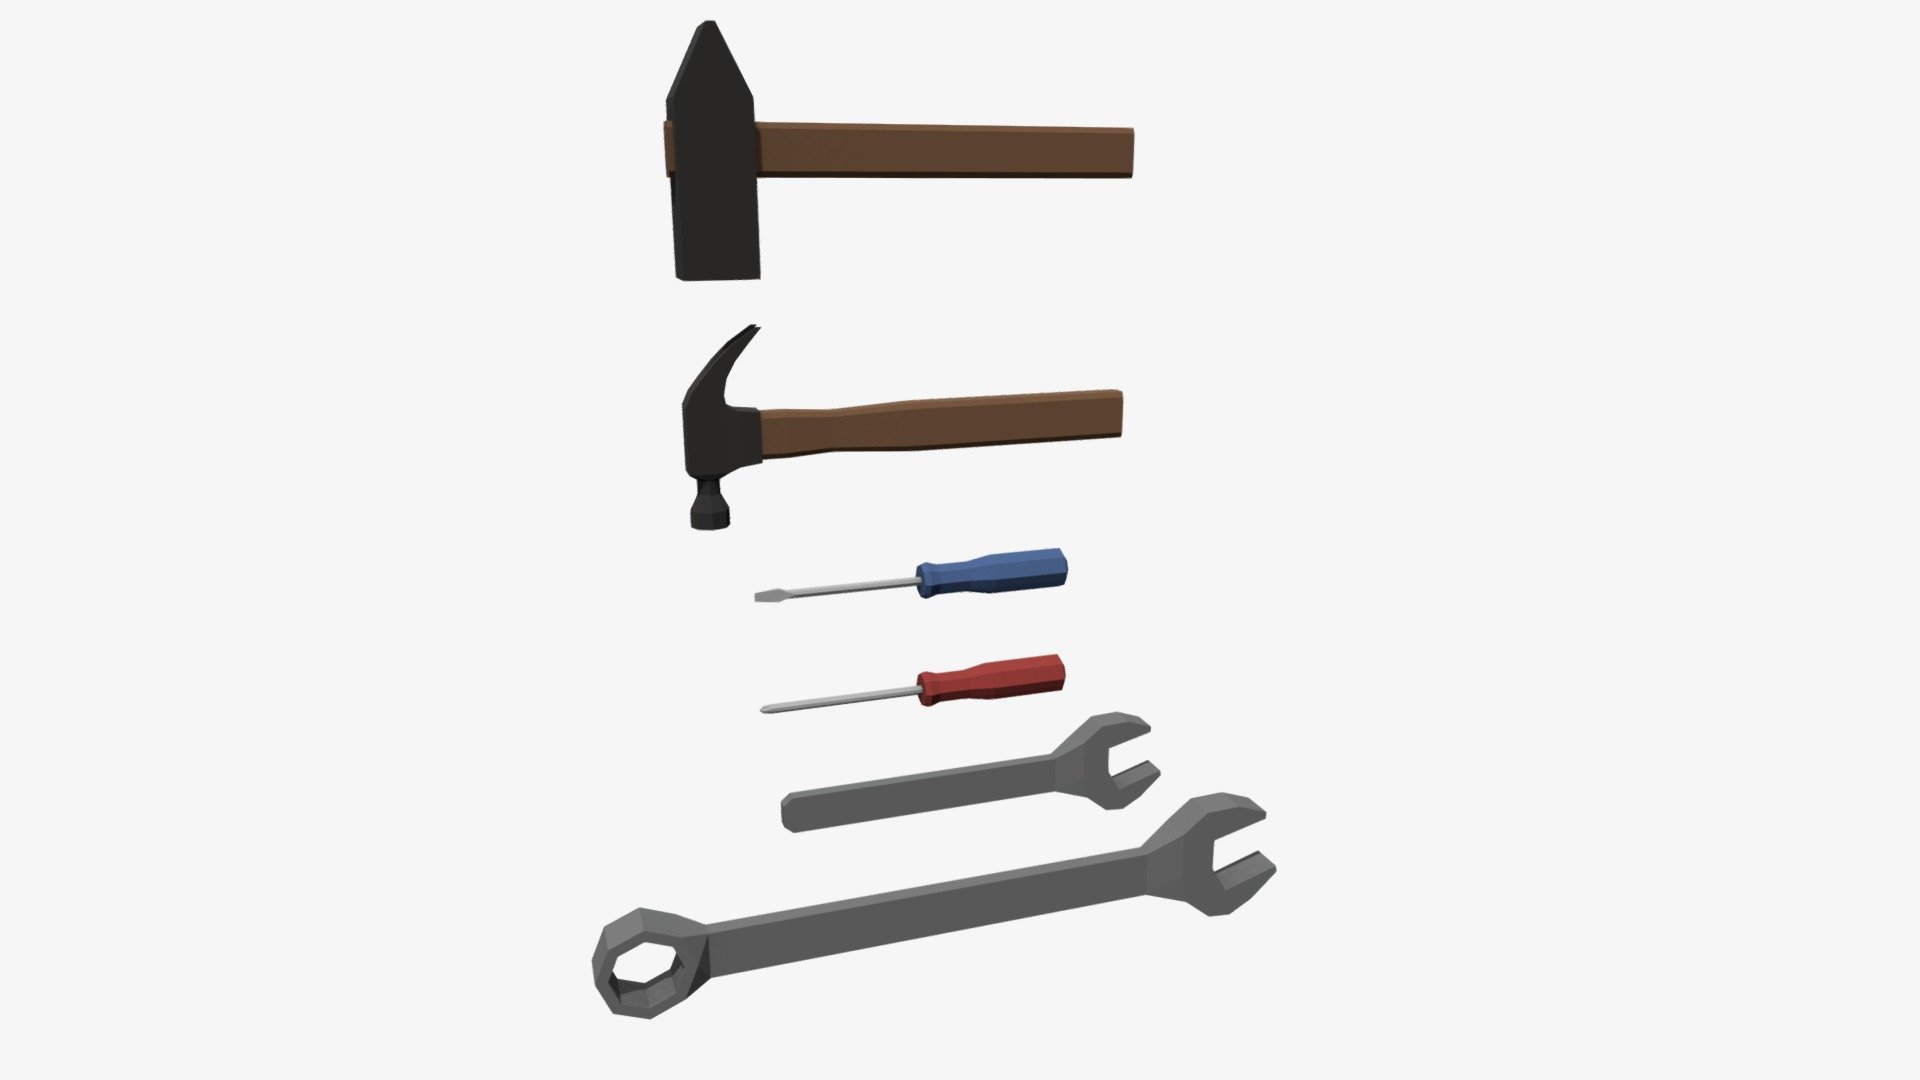 An Old Hammer, a Claw Hammer, Flat head Screwdriver, Phillips head Screwdriver, a Wrench and a Wrench with ratchet 3d model